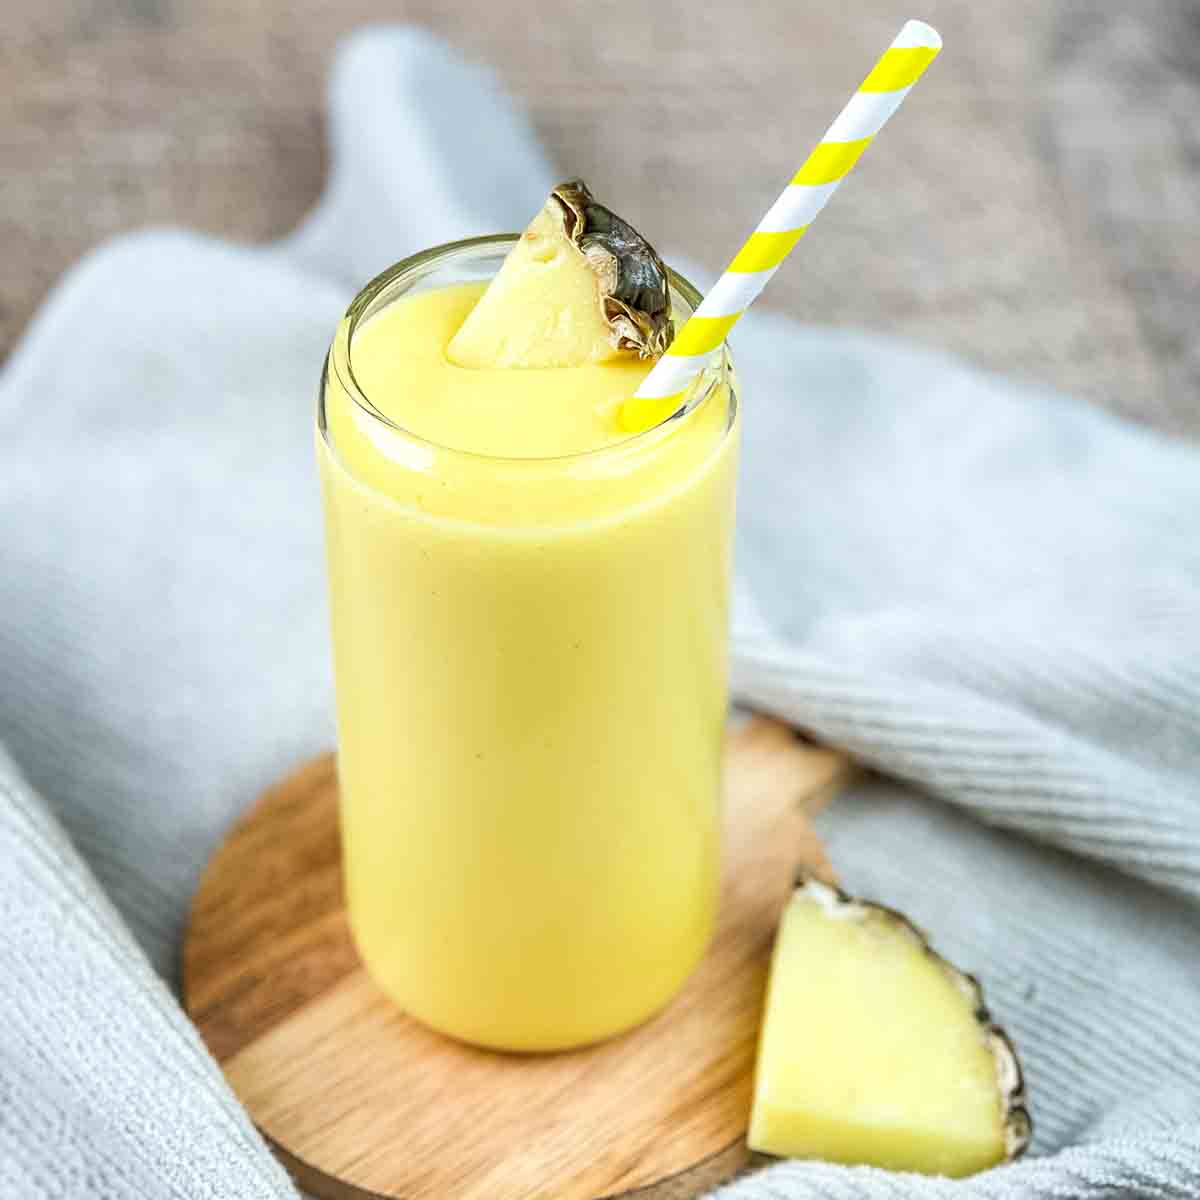 A tall glass of a mango pineapple smoothie with a yellow and white striped straw.